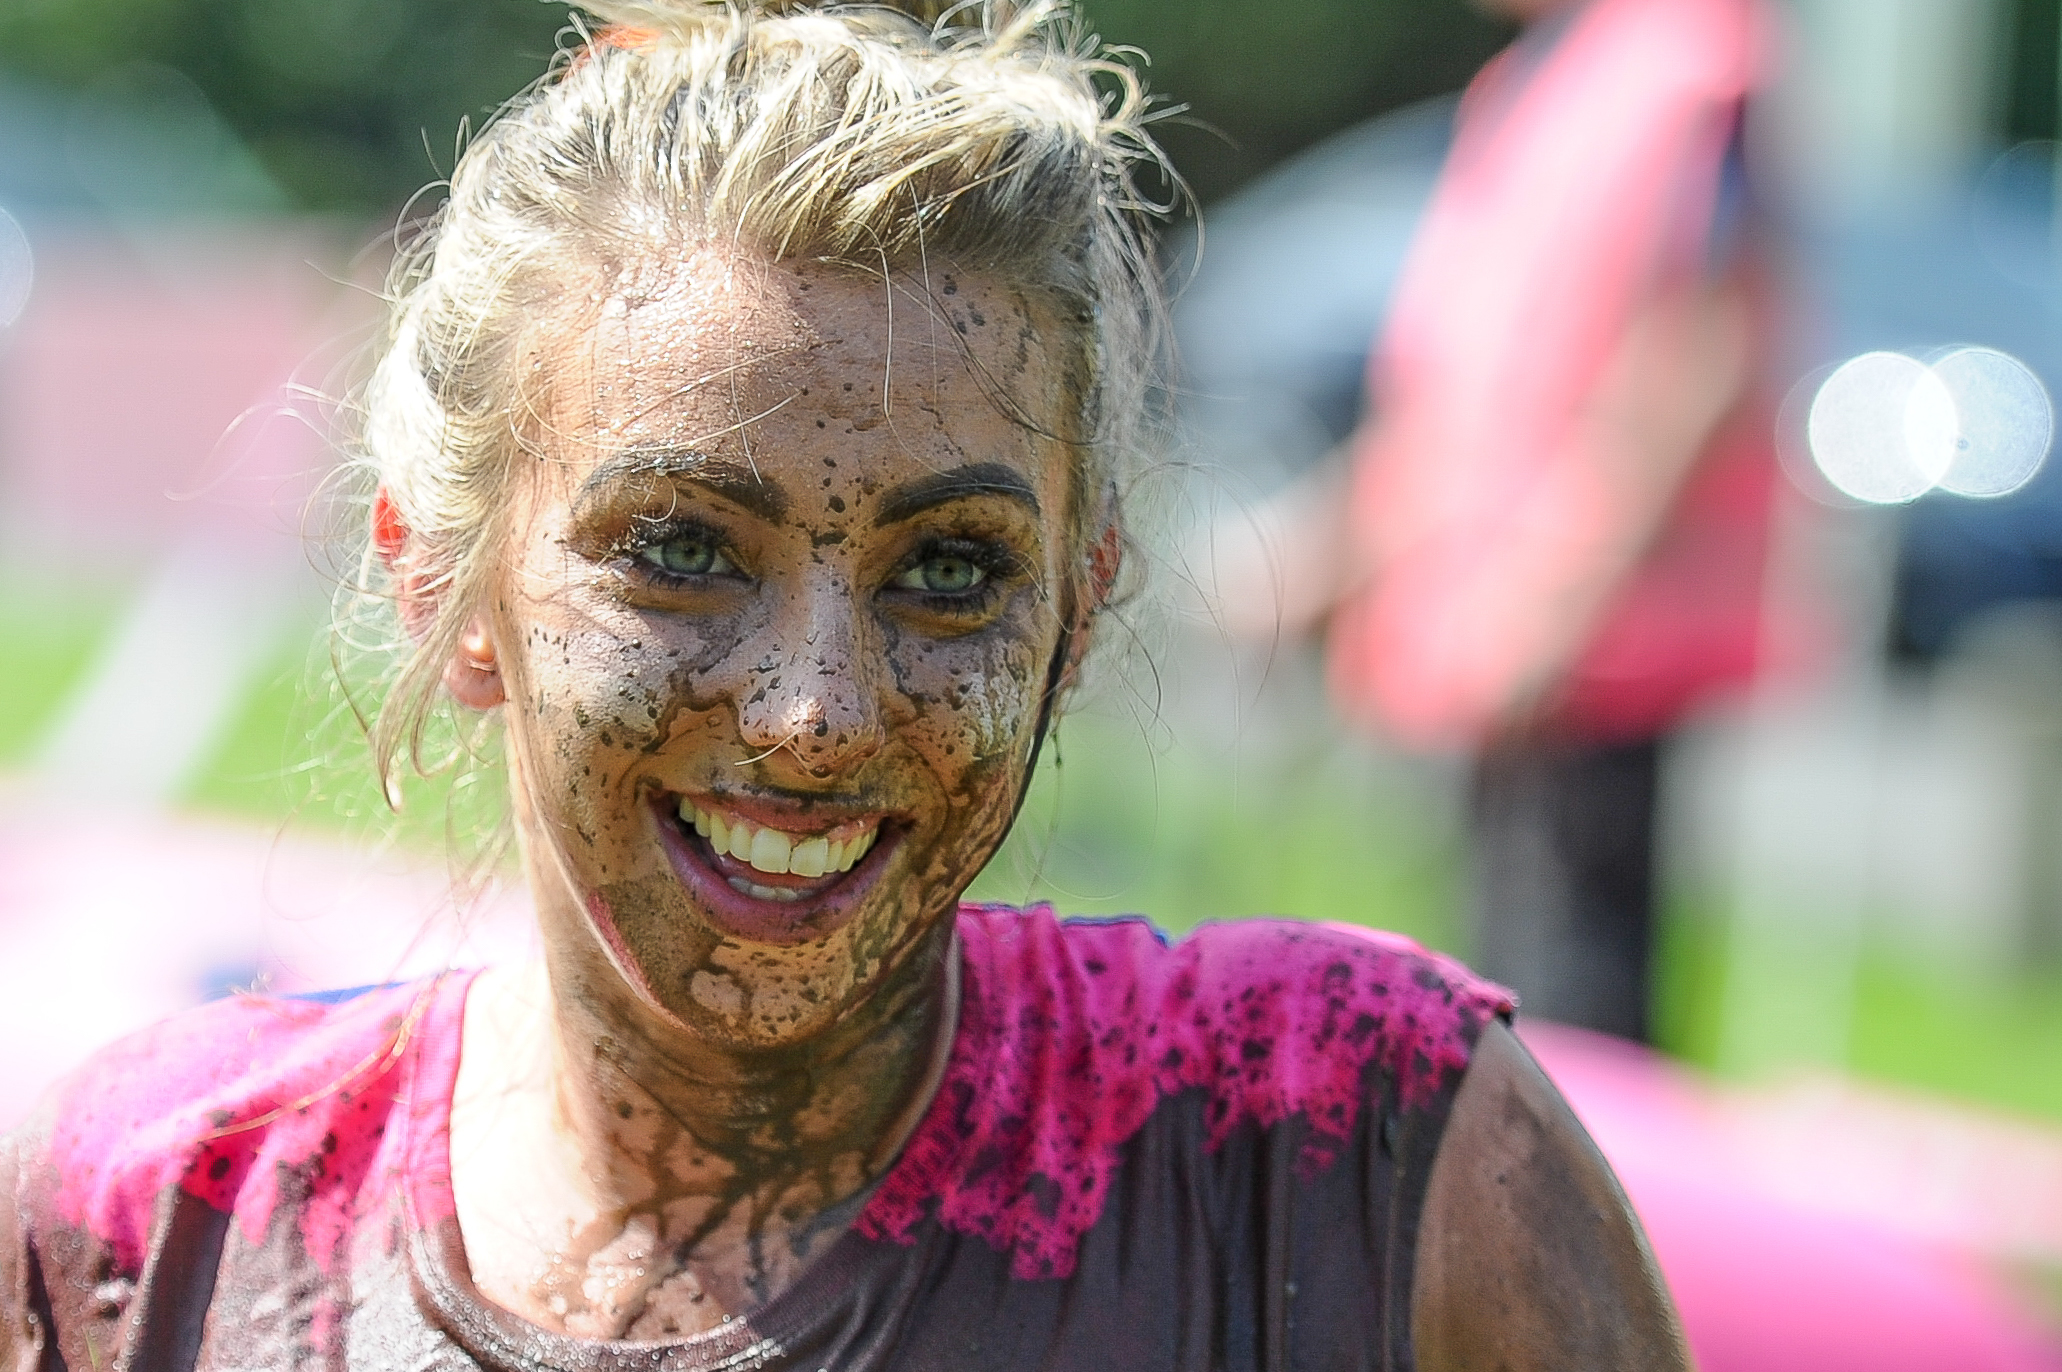 A happy runner braving the mud.